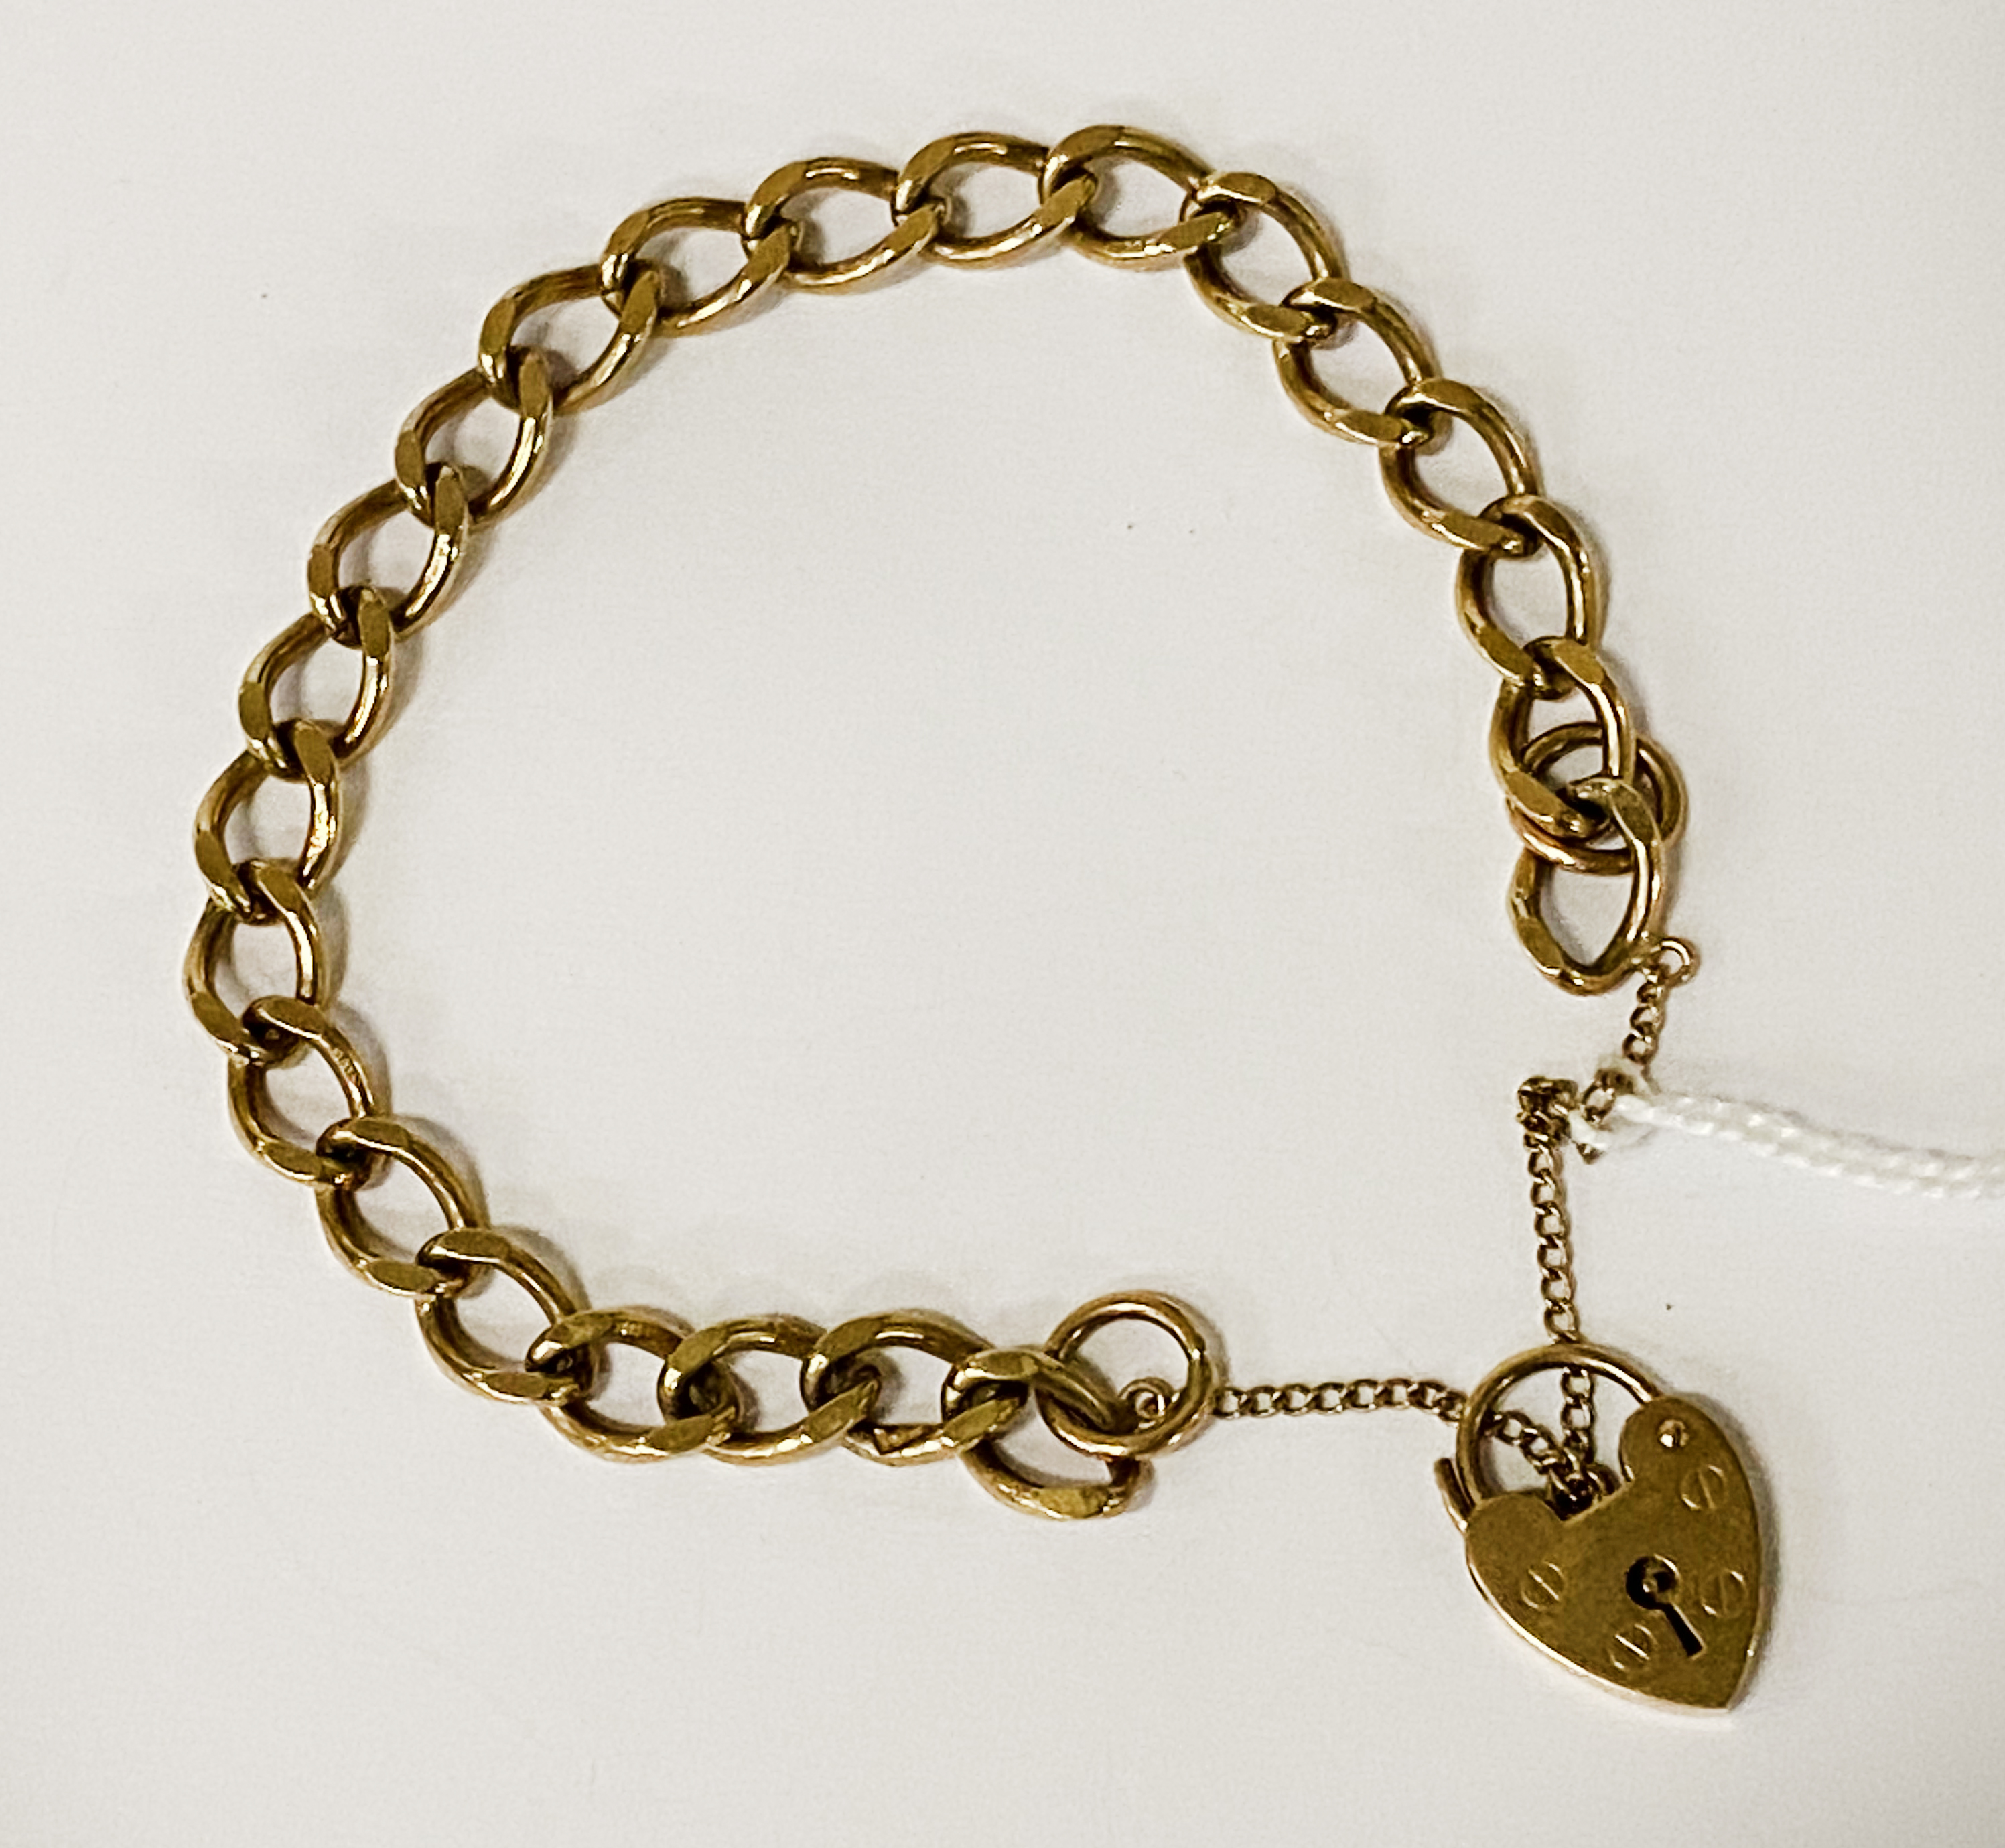 9CT GOLD CURB BRACELET WITH HEART PADLOCK - APPROX 13.6 GRAMS